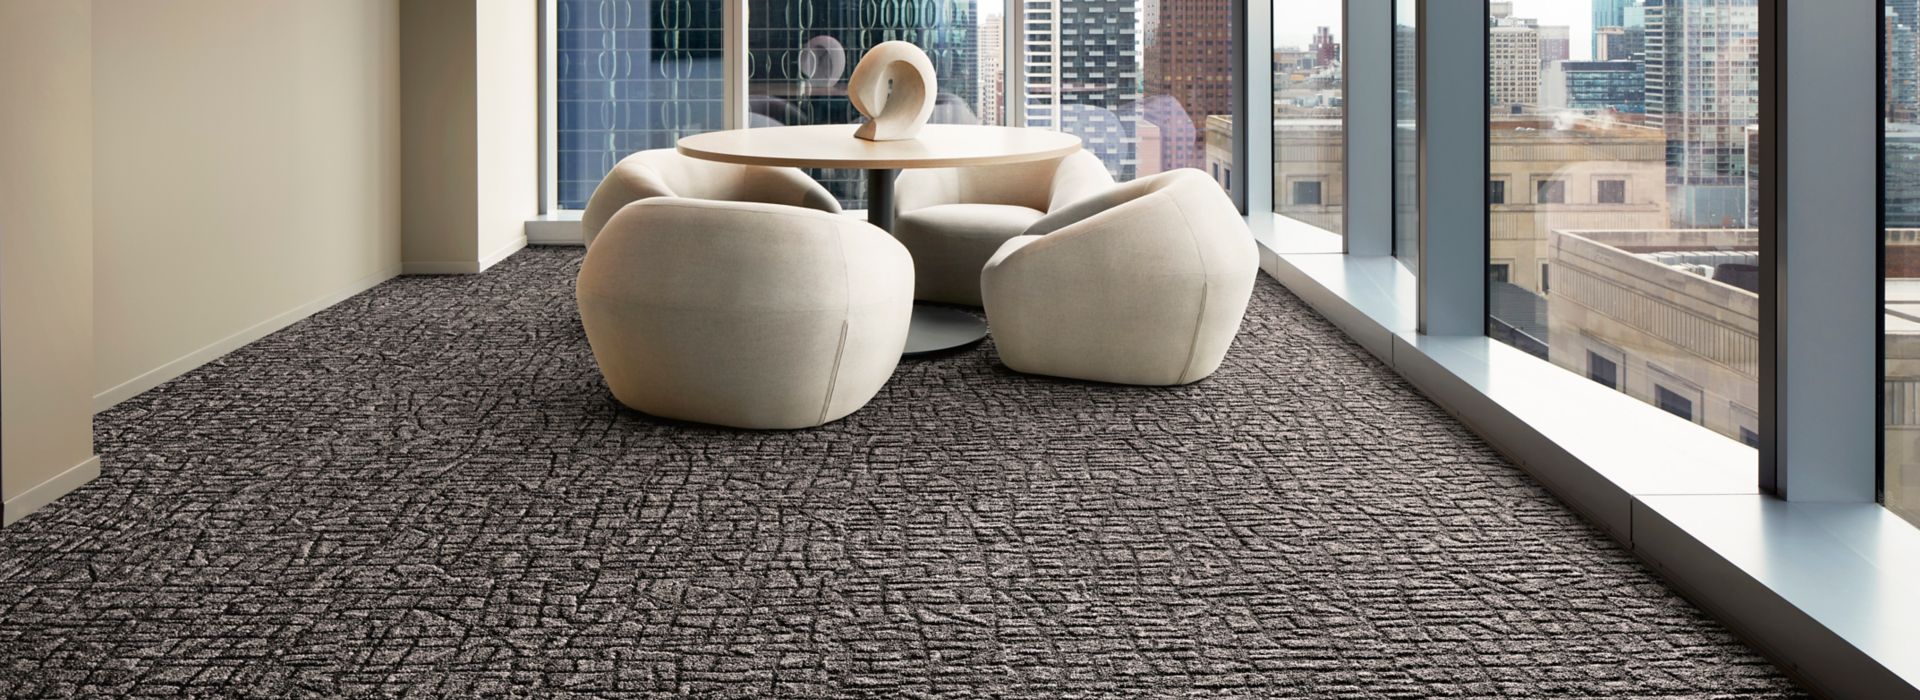 Interface E610 carpet tile in modern office meeting area with small table and low chairs